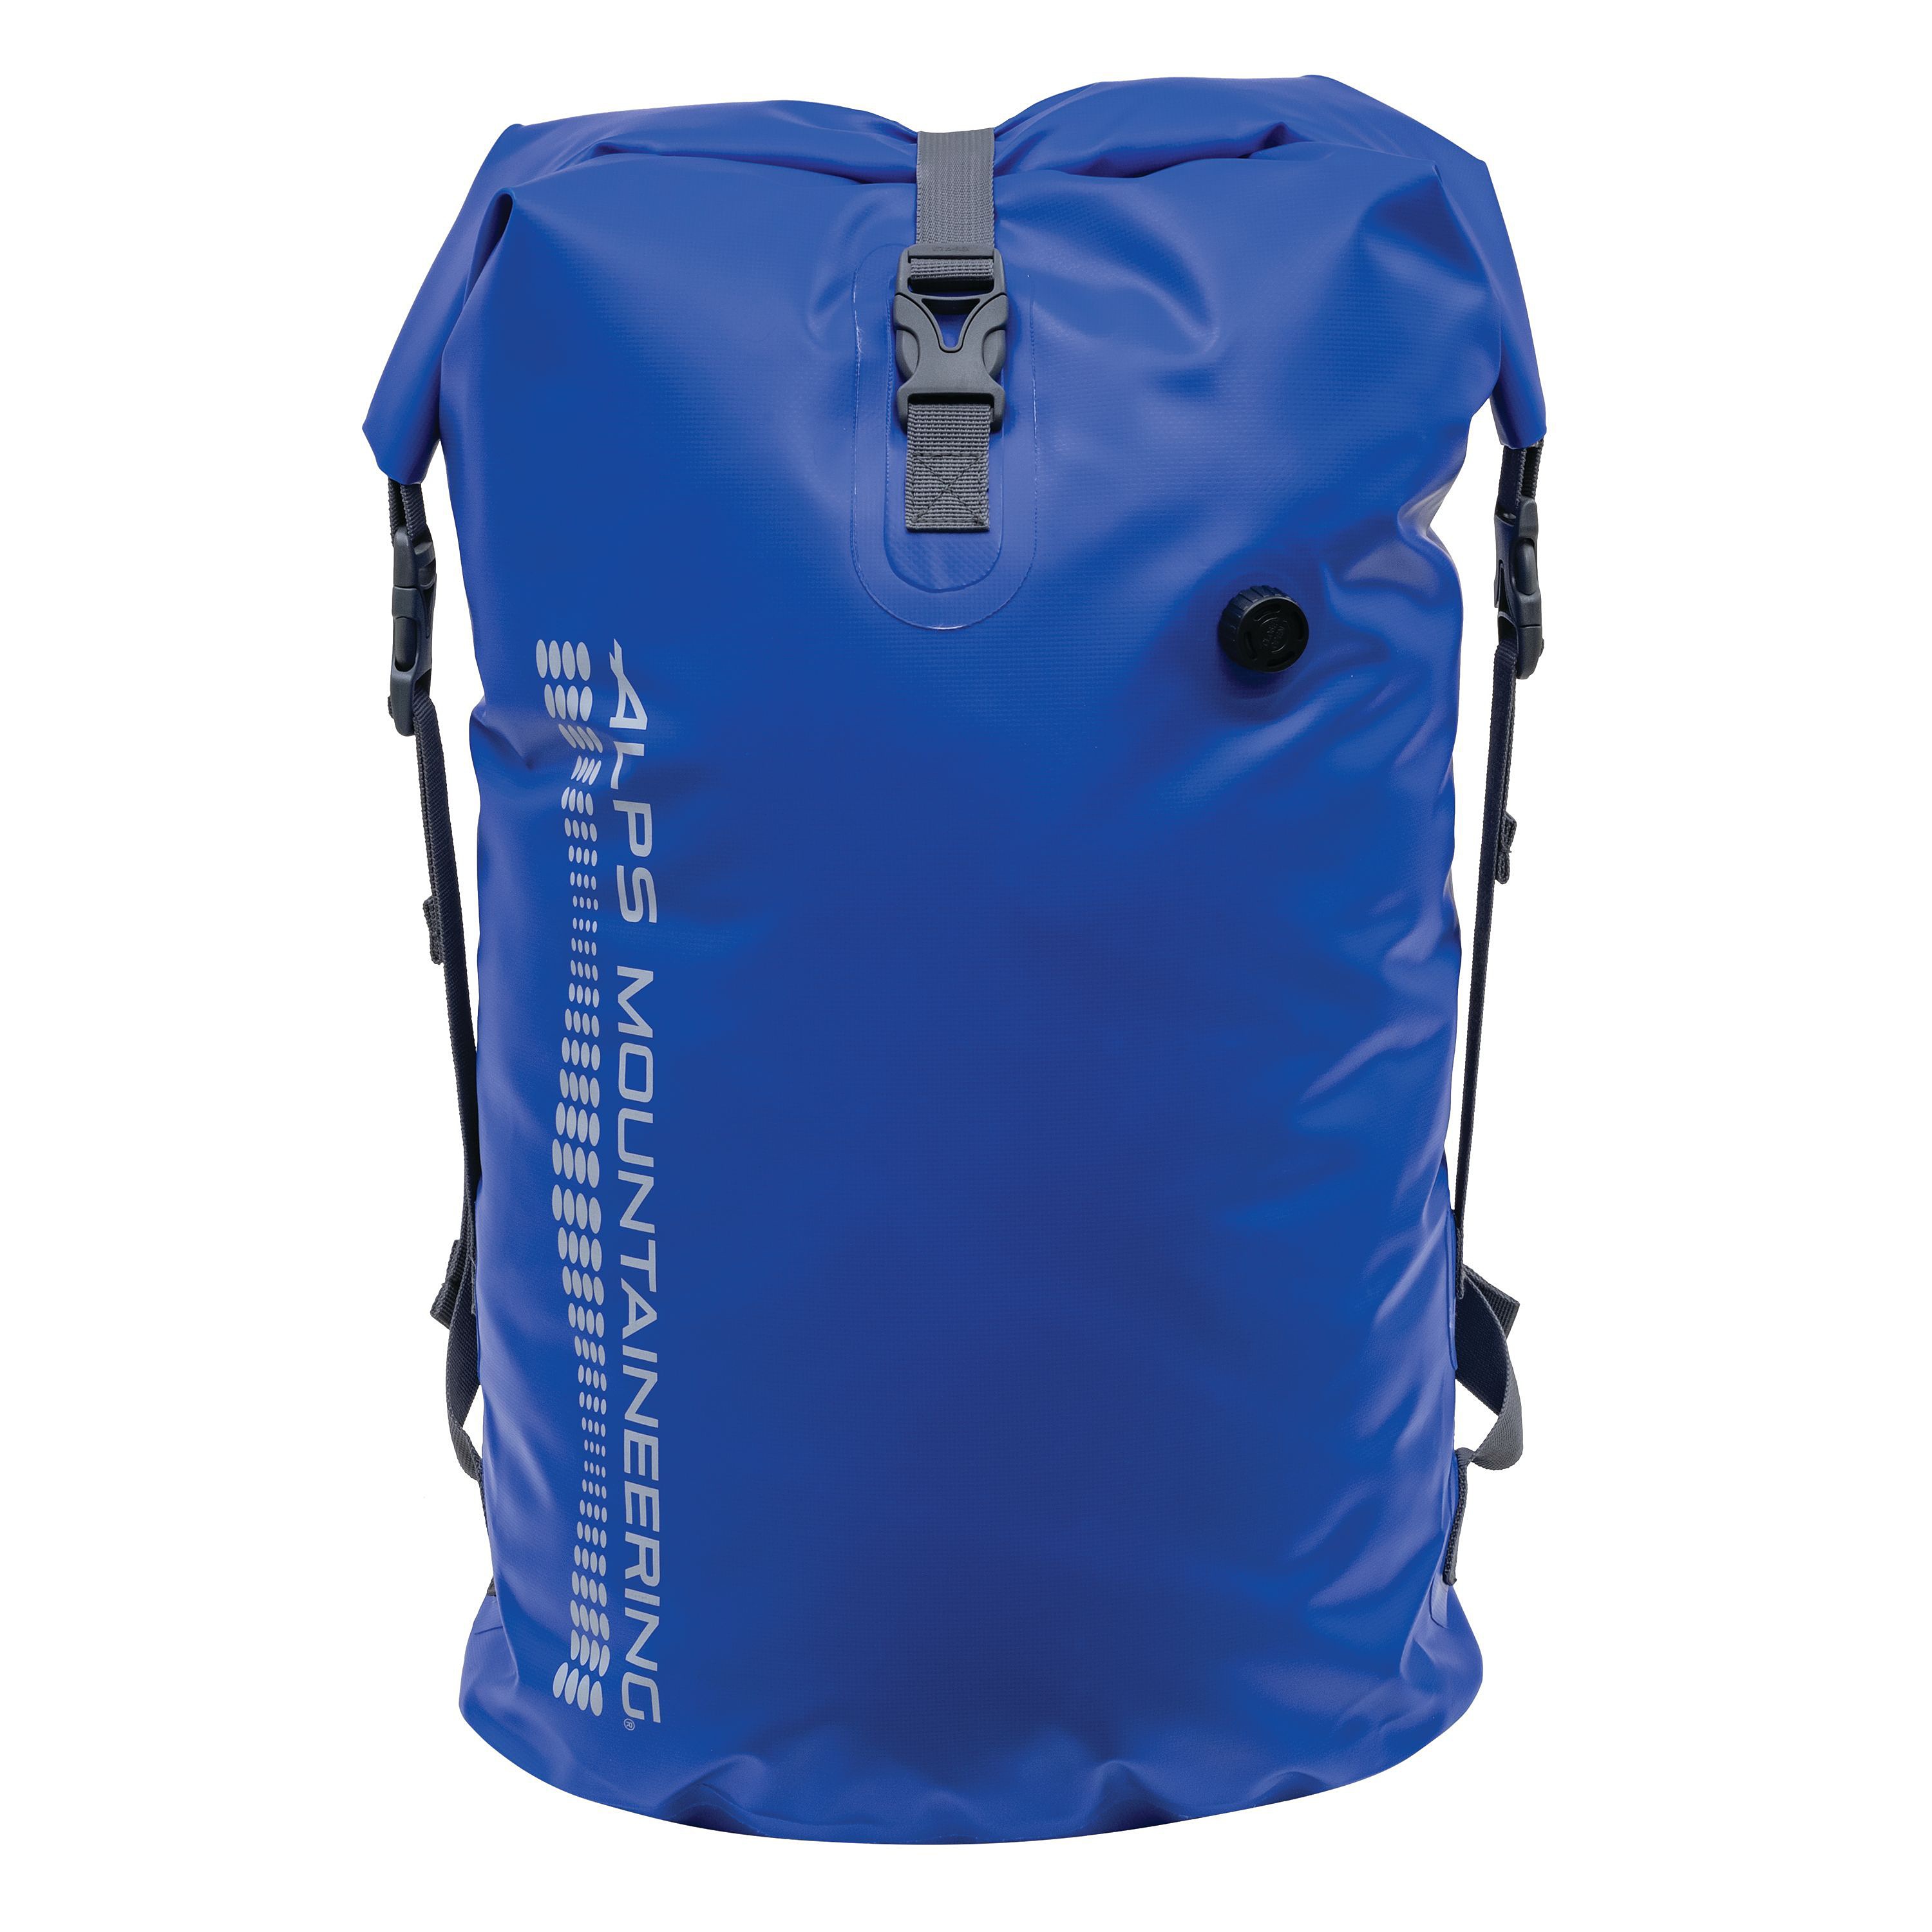 Alps Mountaineering Torrent Dry Storage Backpack - 35L